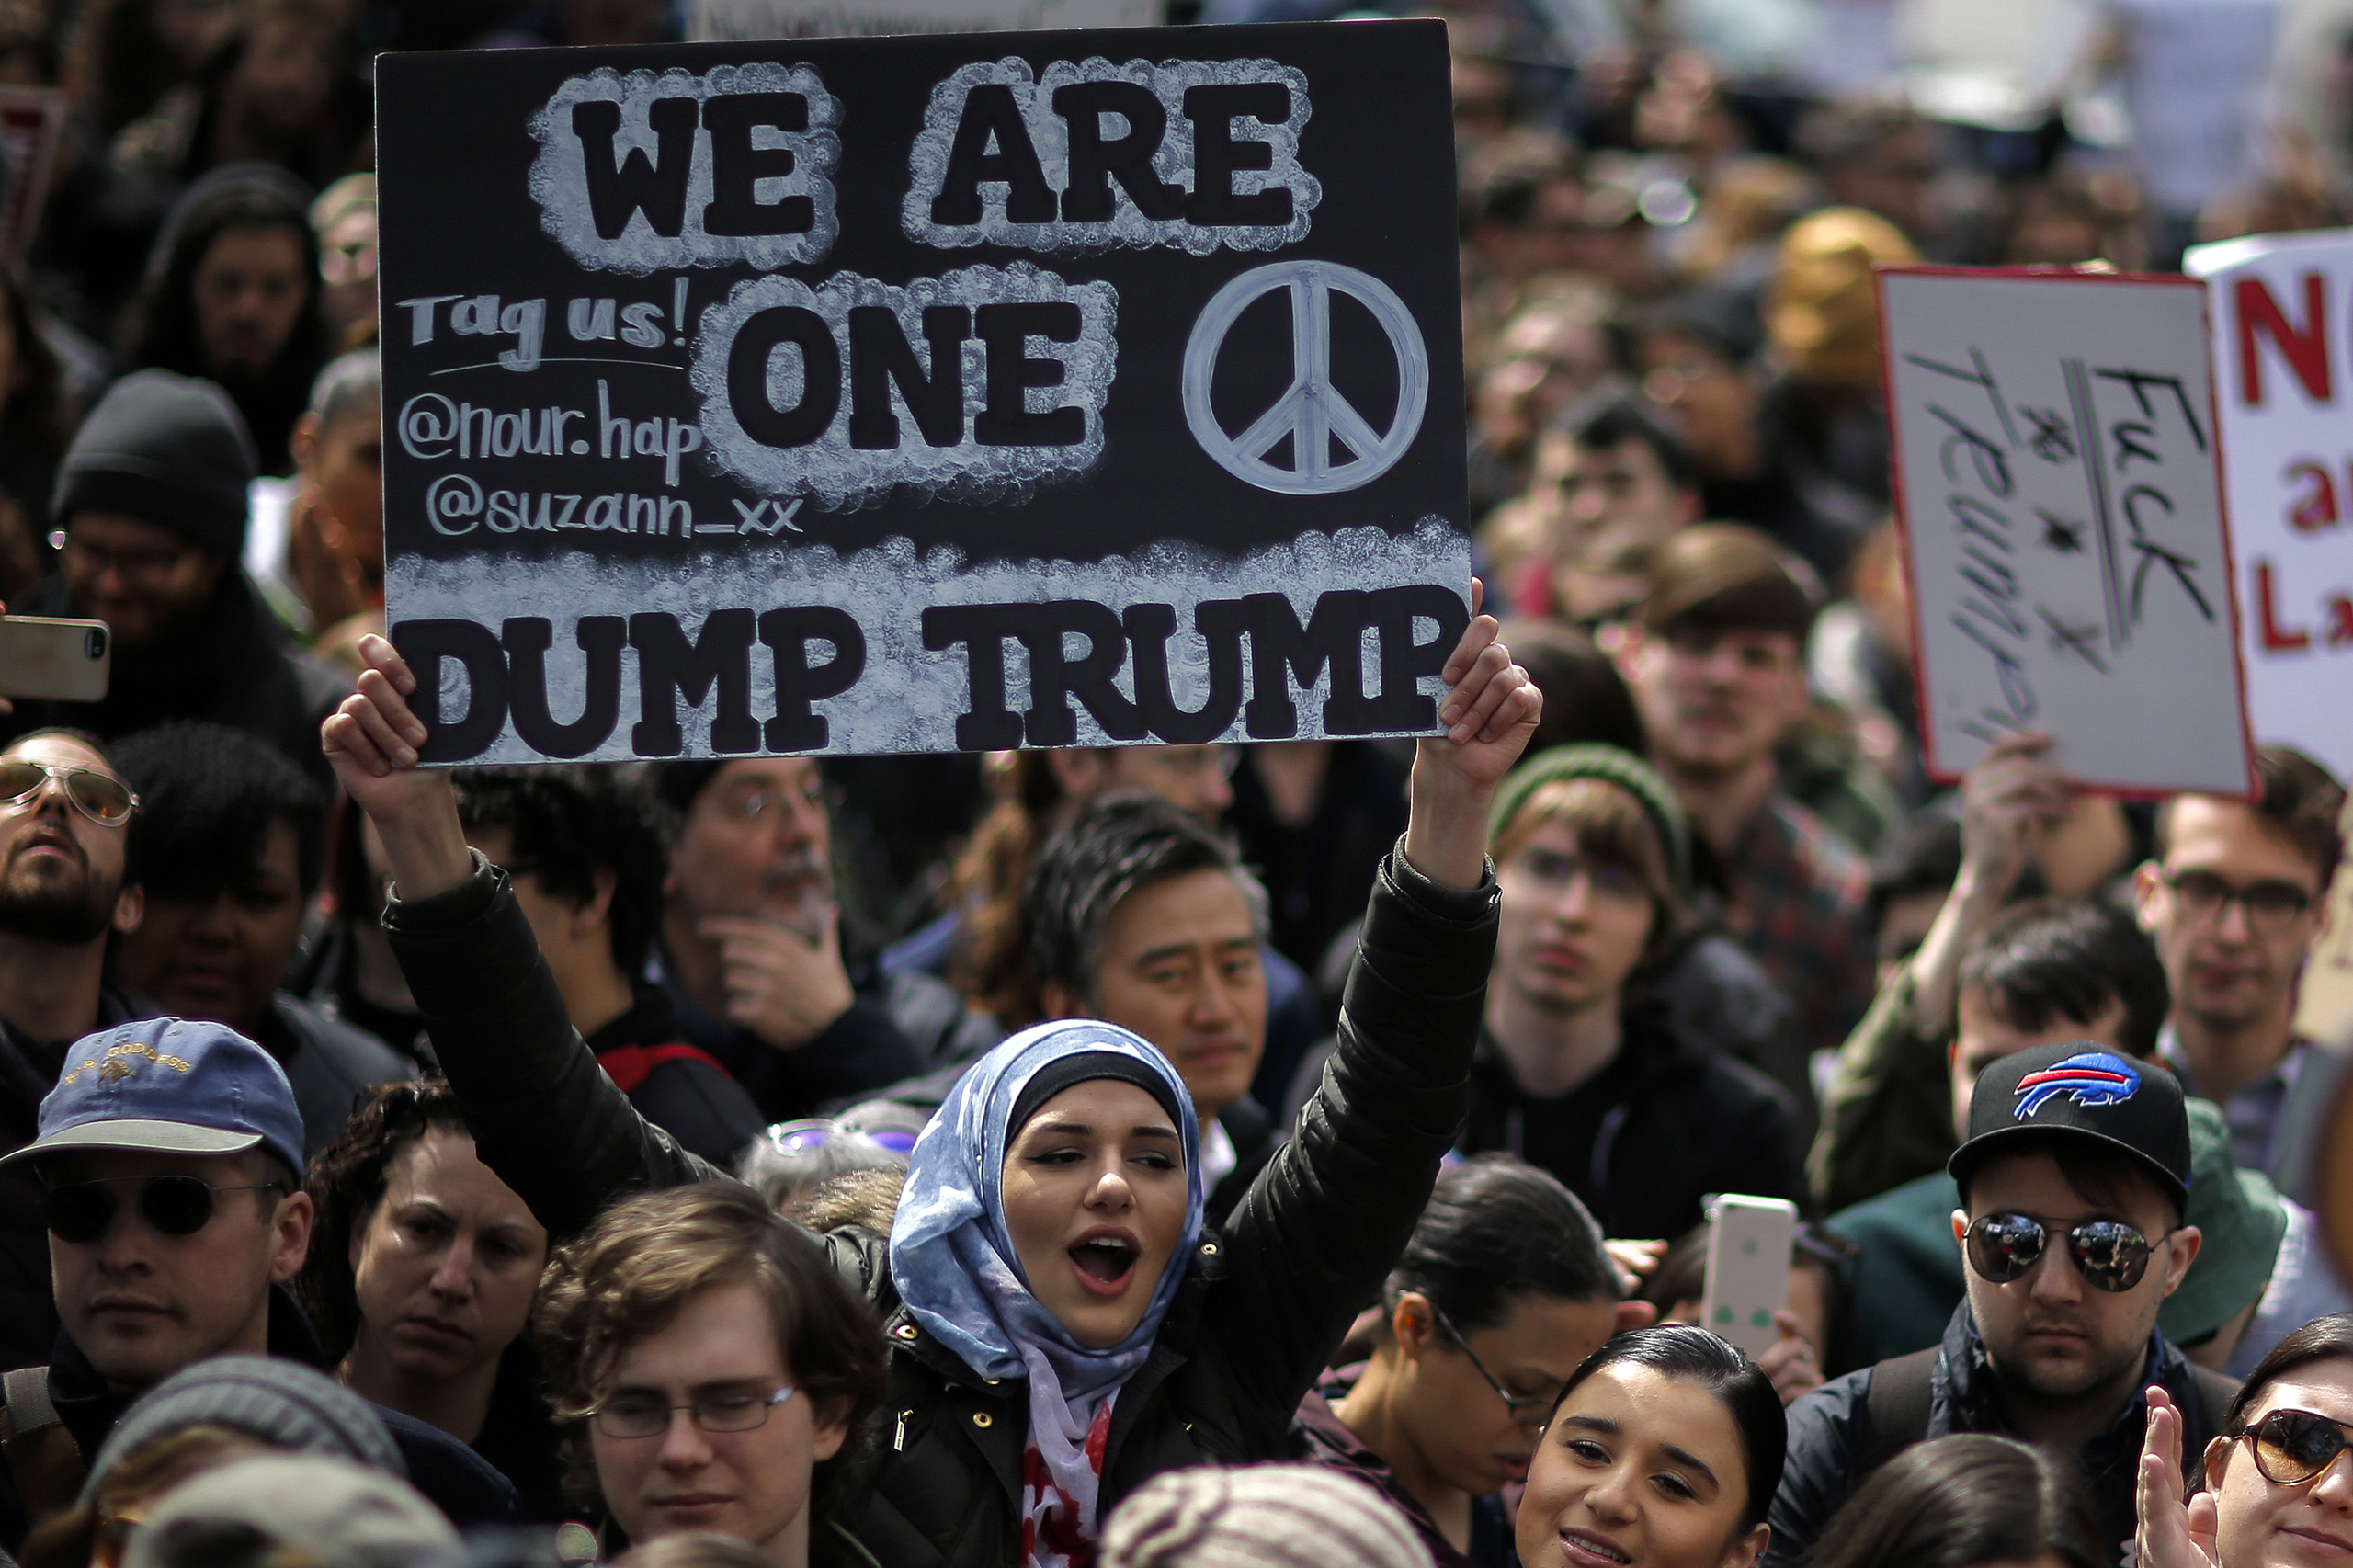 People take part in a protest against Republican presidential candidate Donald Trump in New York City, on March 19, 2016. (Eduardo Munoz Alvarez—Getty Images)